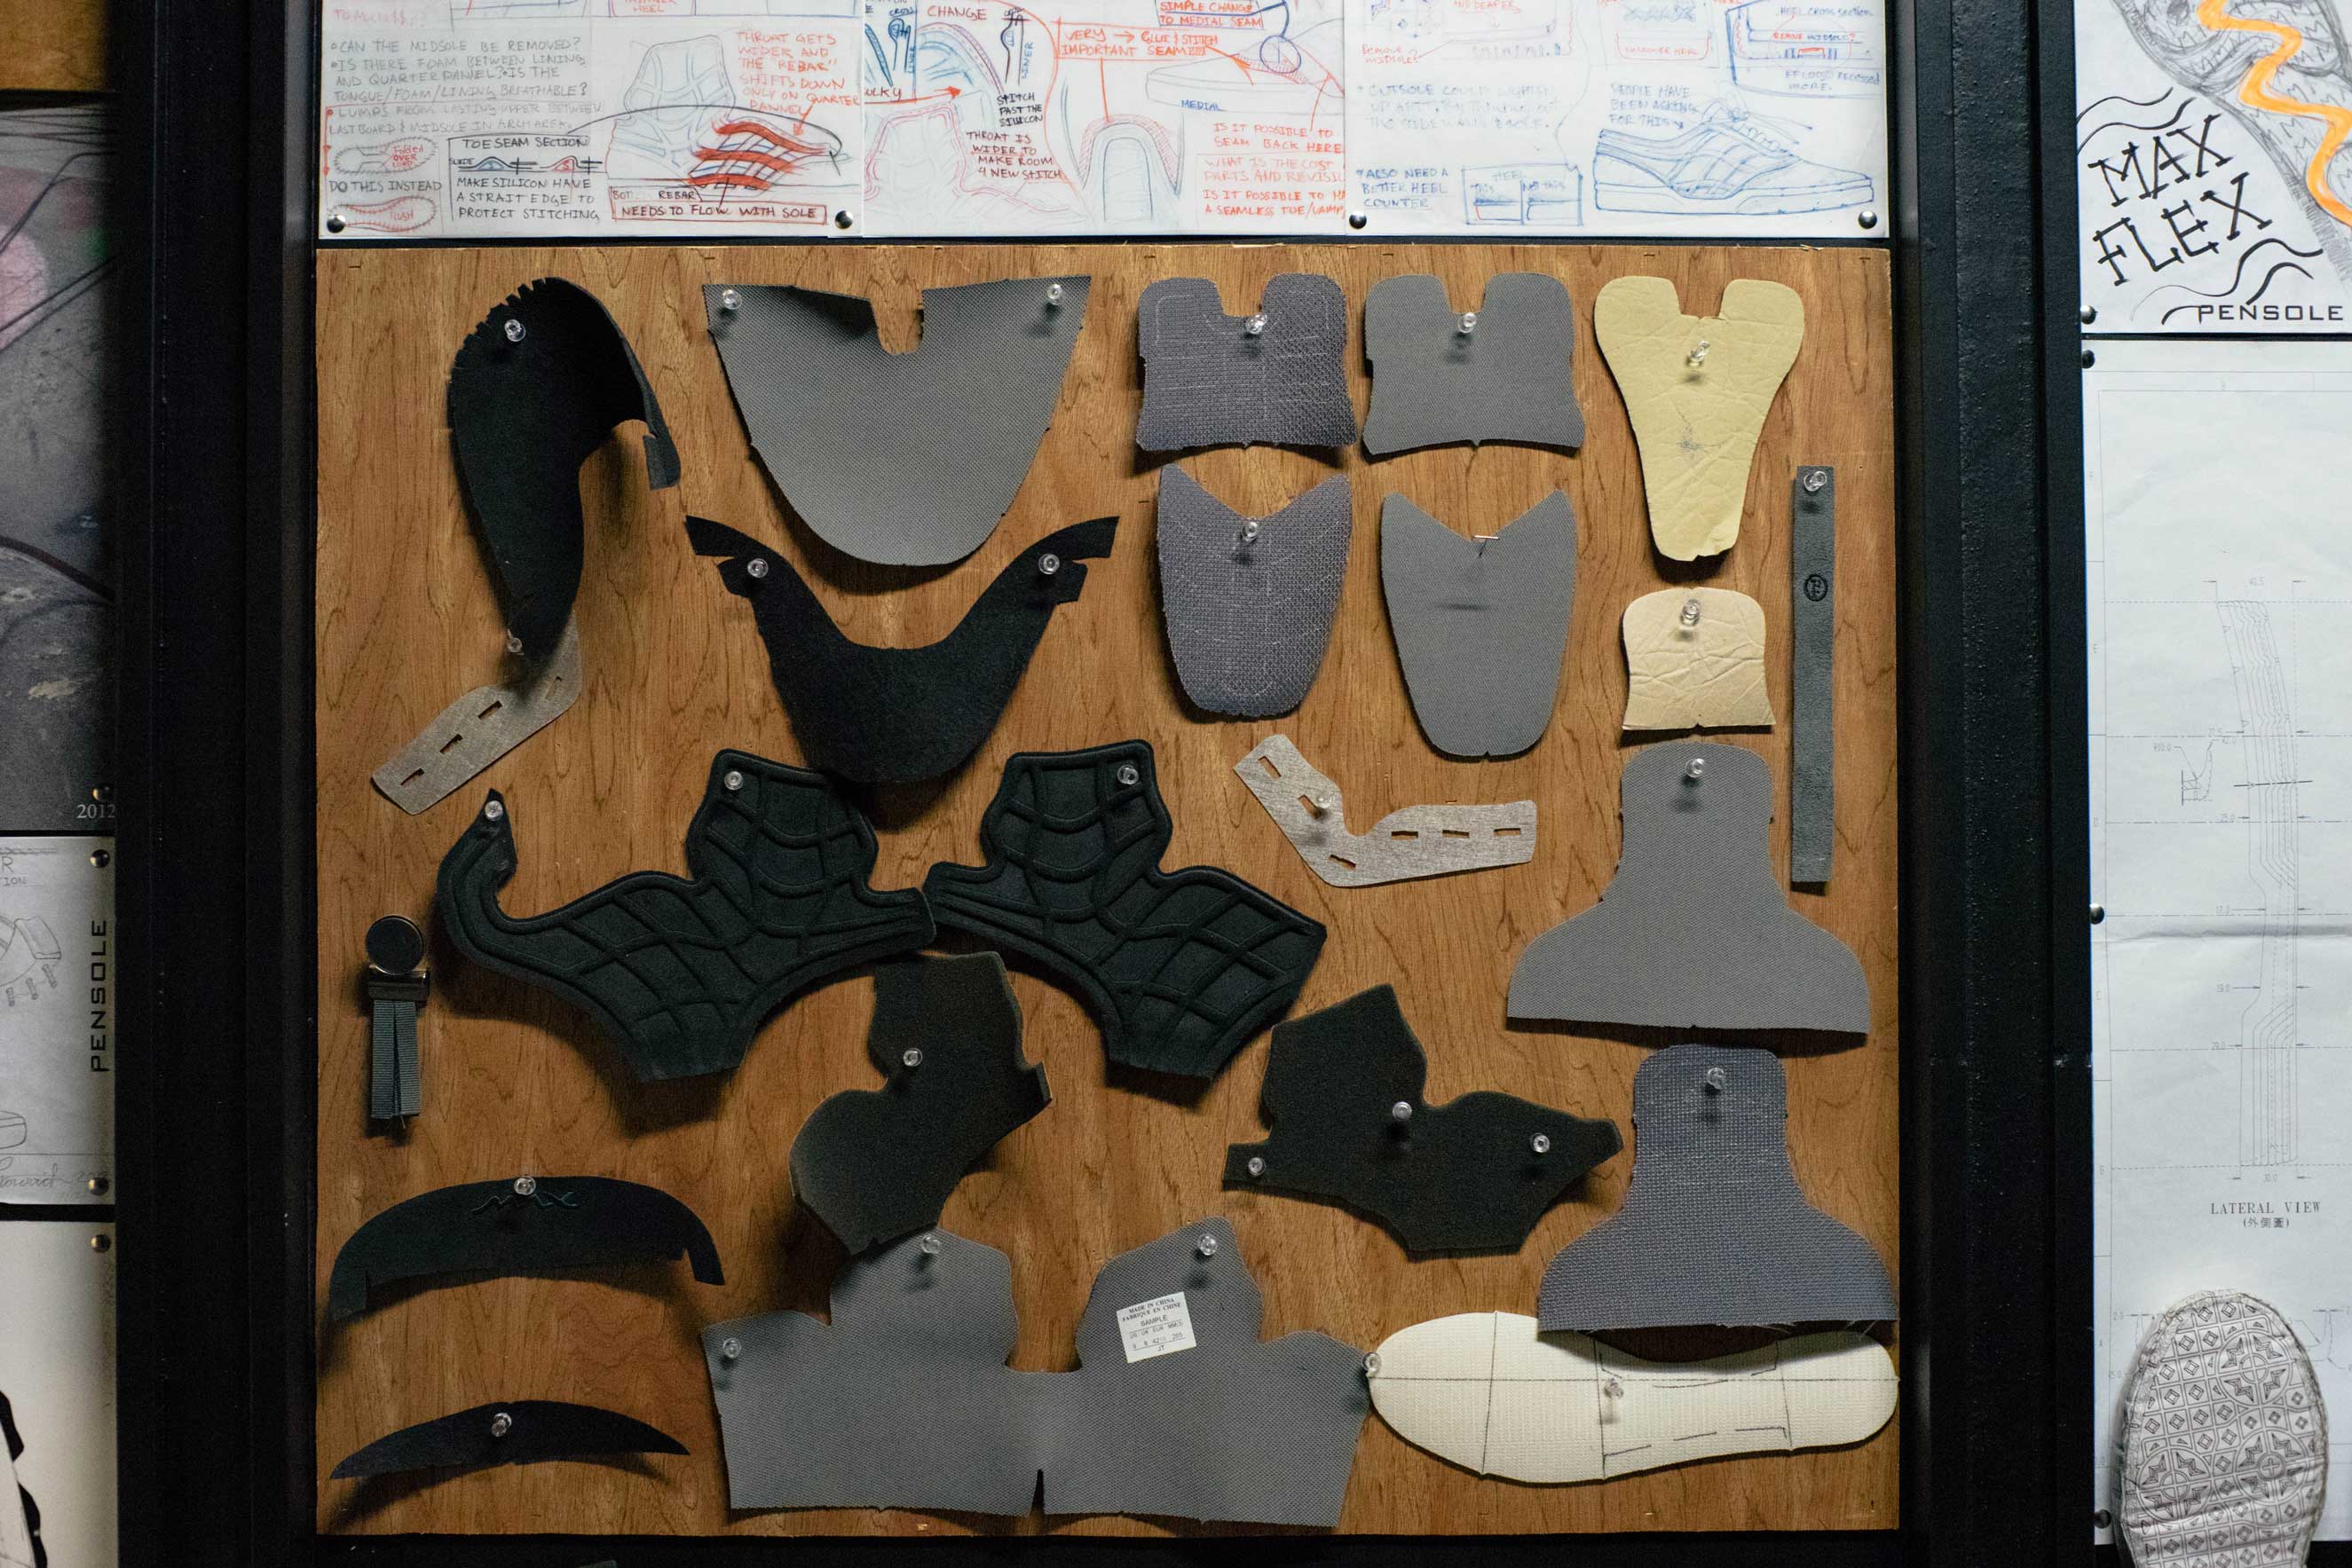 Multiple shoe design pieces pinned up on a wooden board.